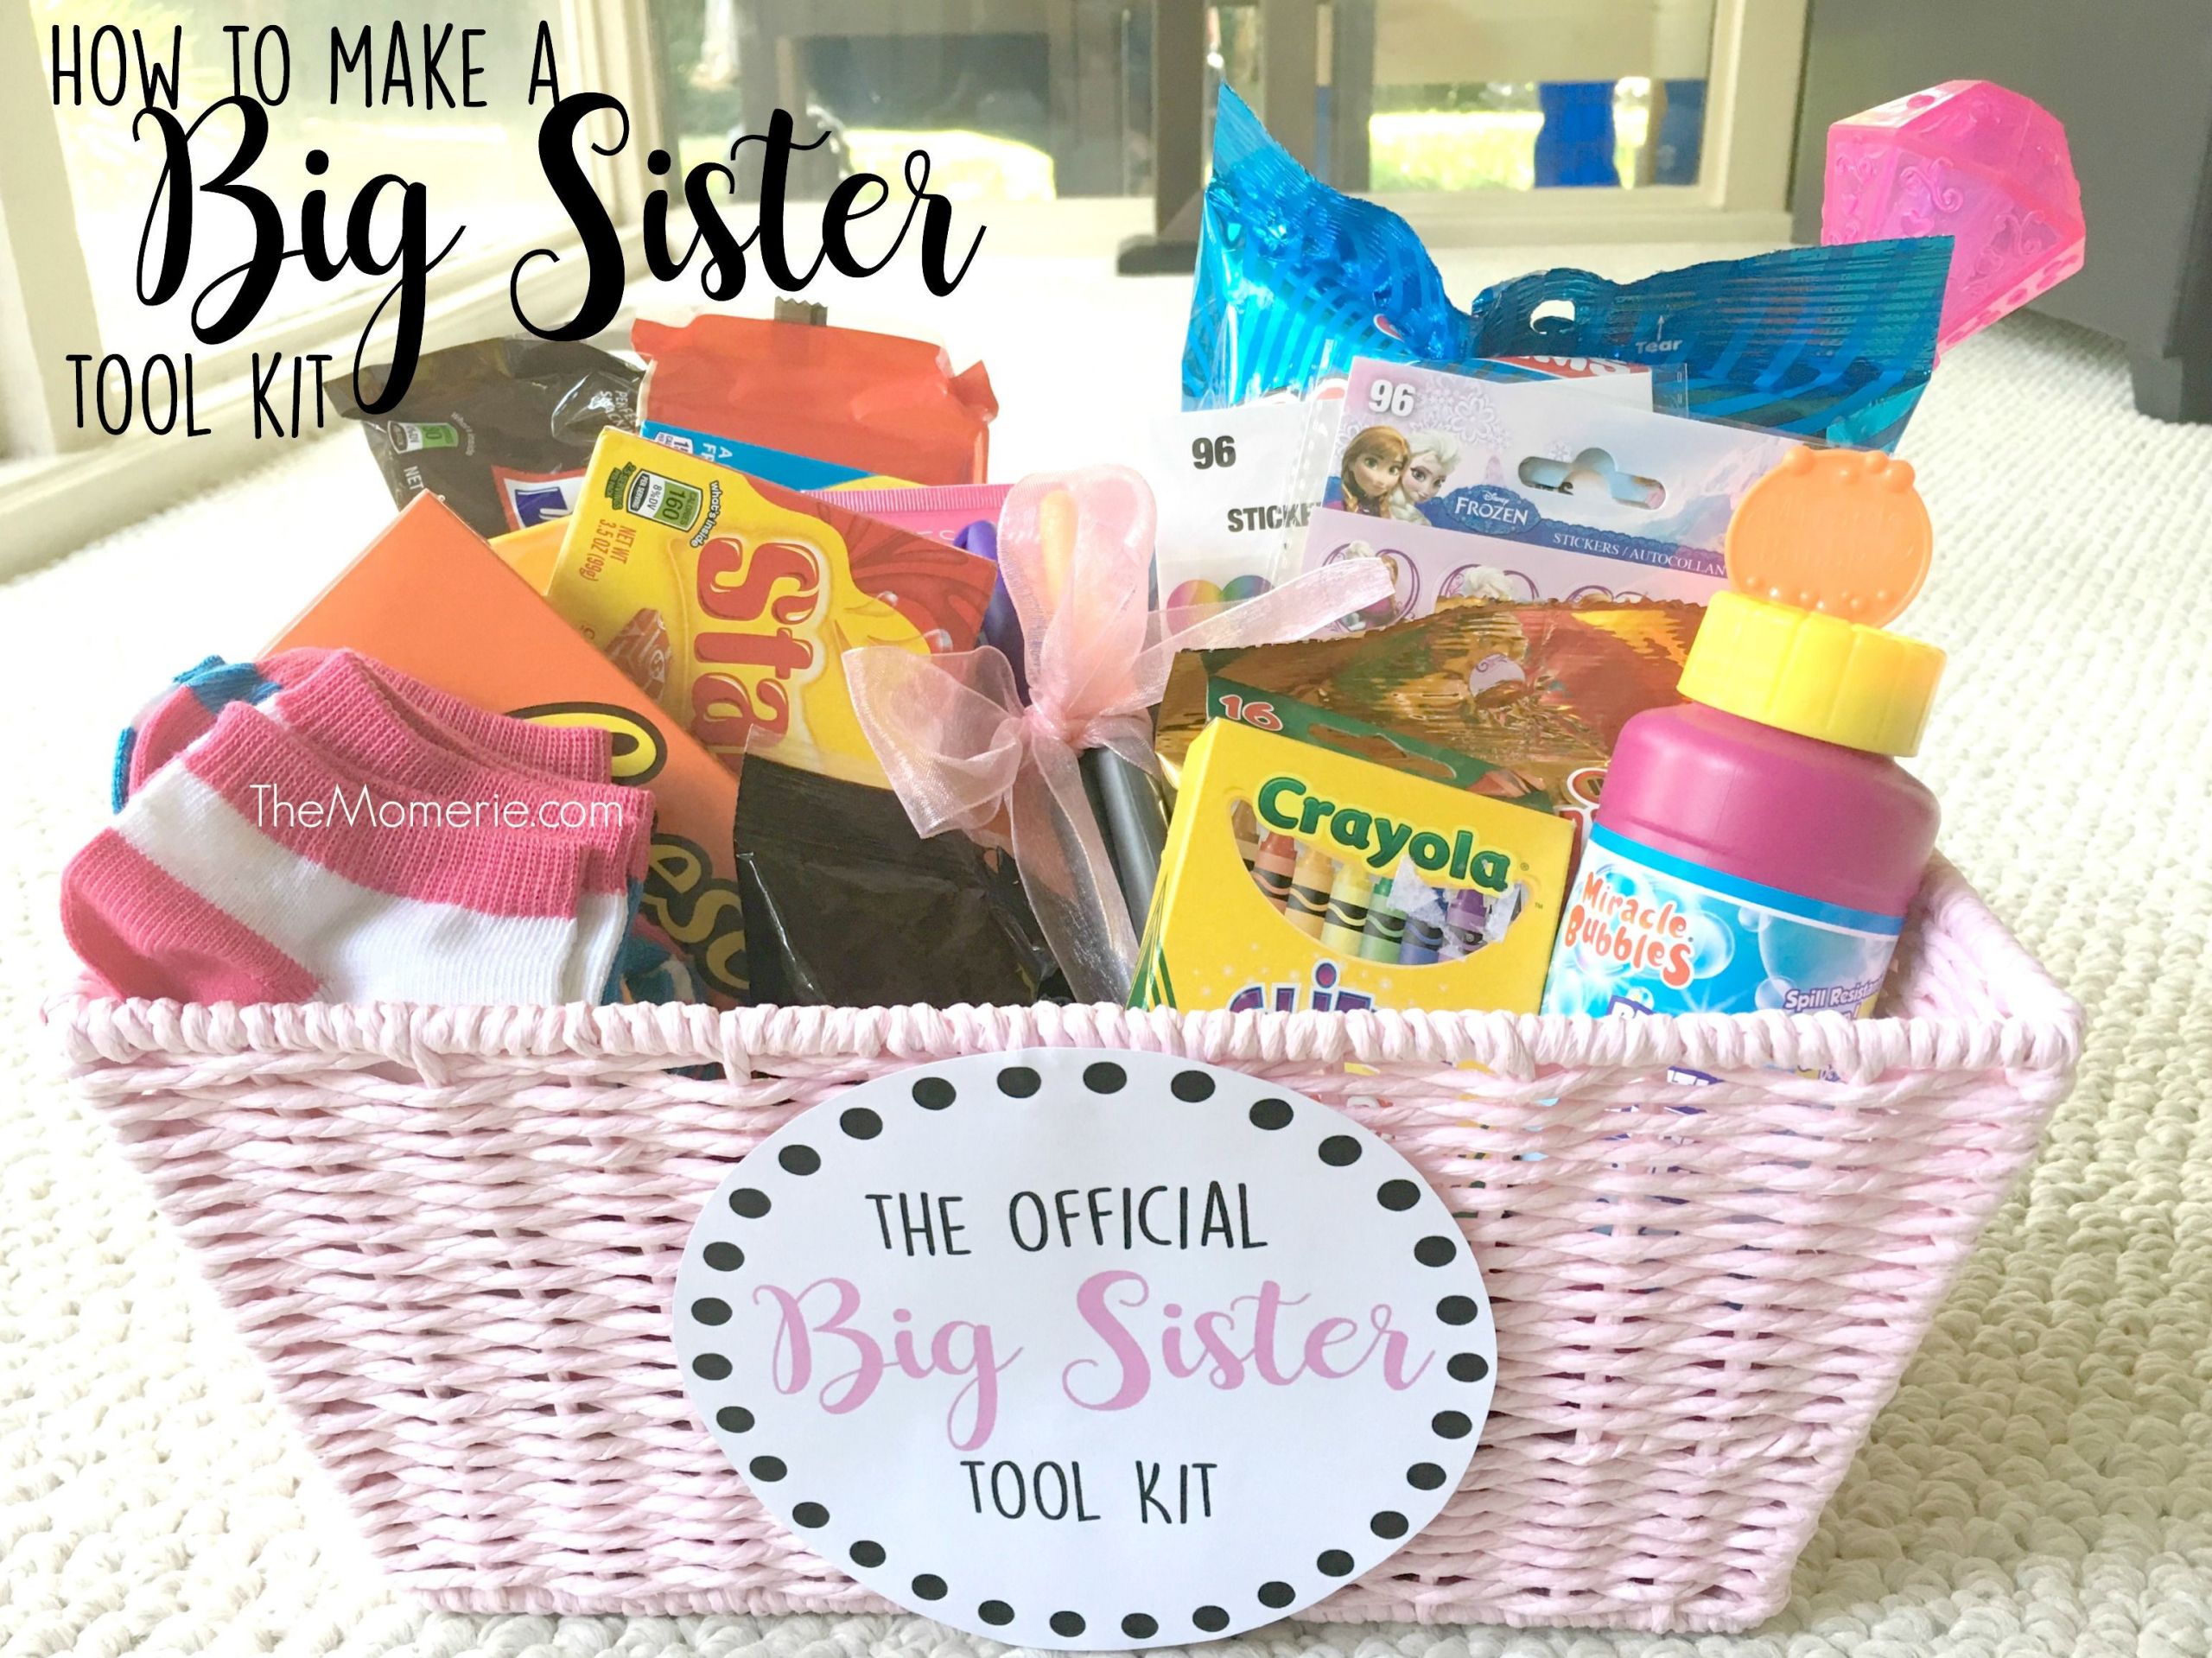 Gift Ideas For Brothers Girlfriend
 How To Make a Big Sister Tool Kit The Momerie …